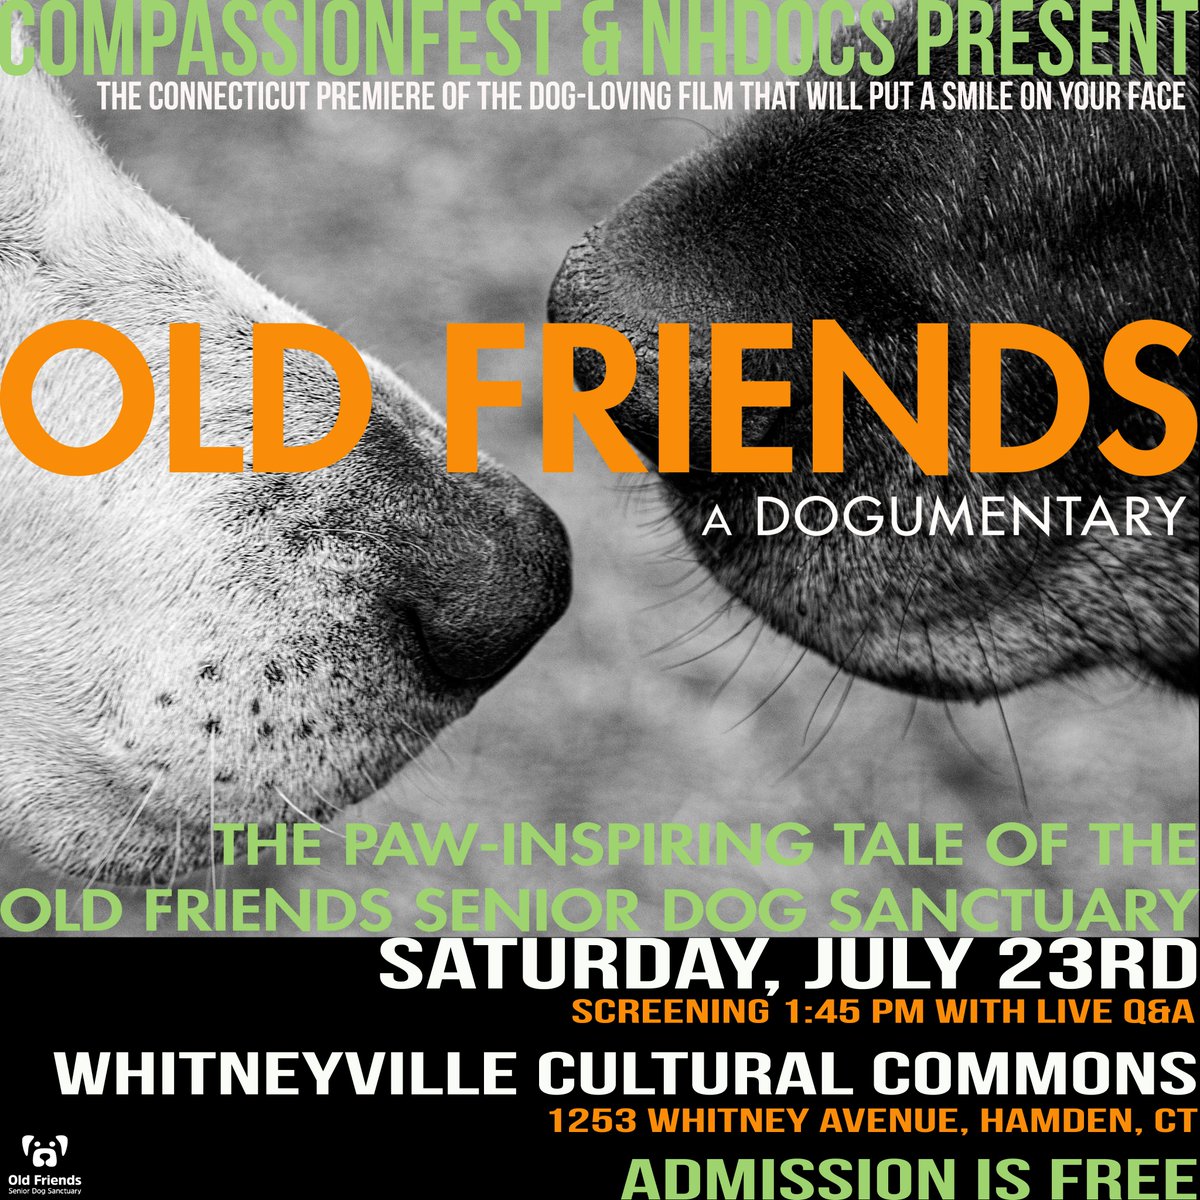 For all our followers in Connecticut...! 🎥 @CompassionCT @GormanBechard #OFSDS #OldFriendsADogumentary #SeniorDogs #Dogs